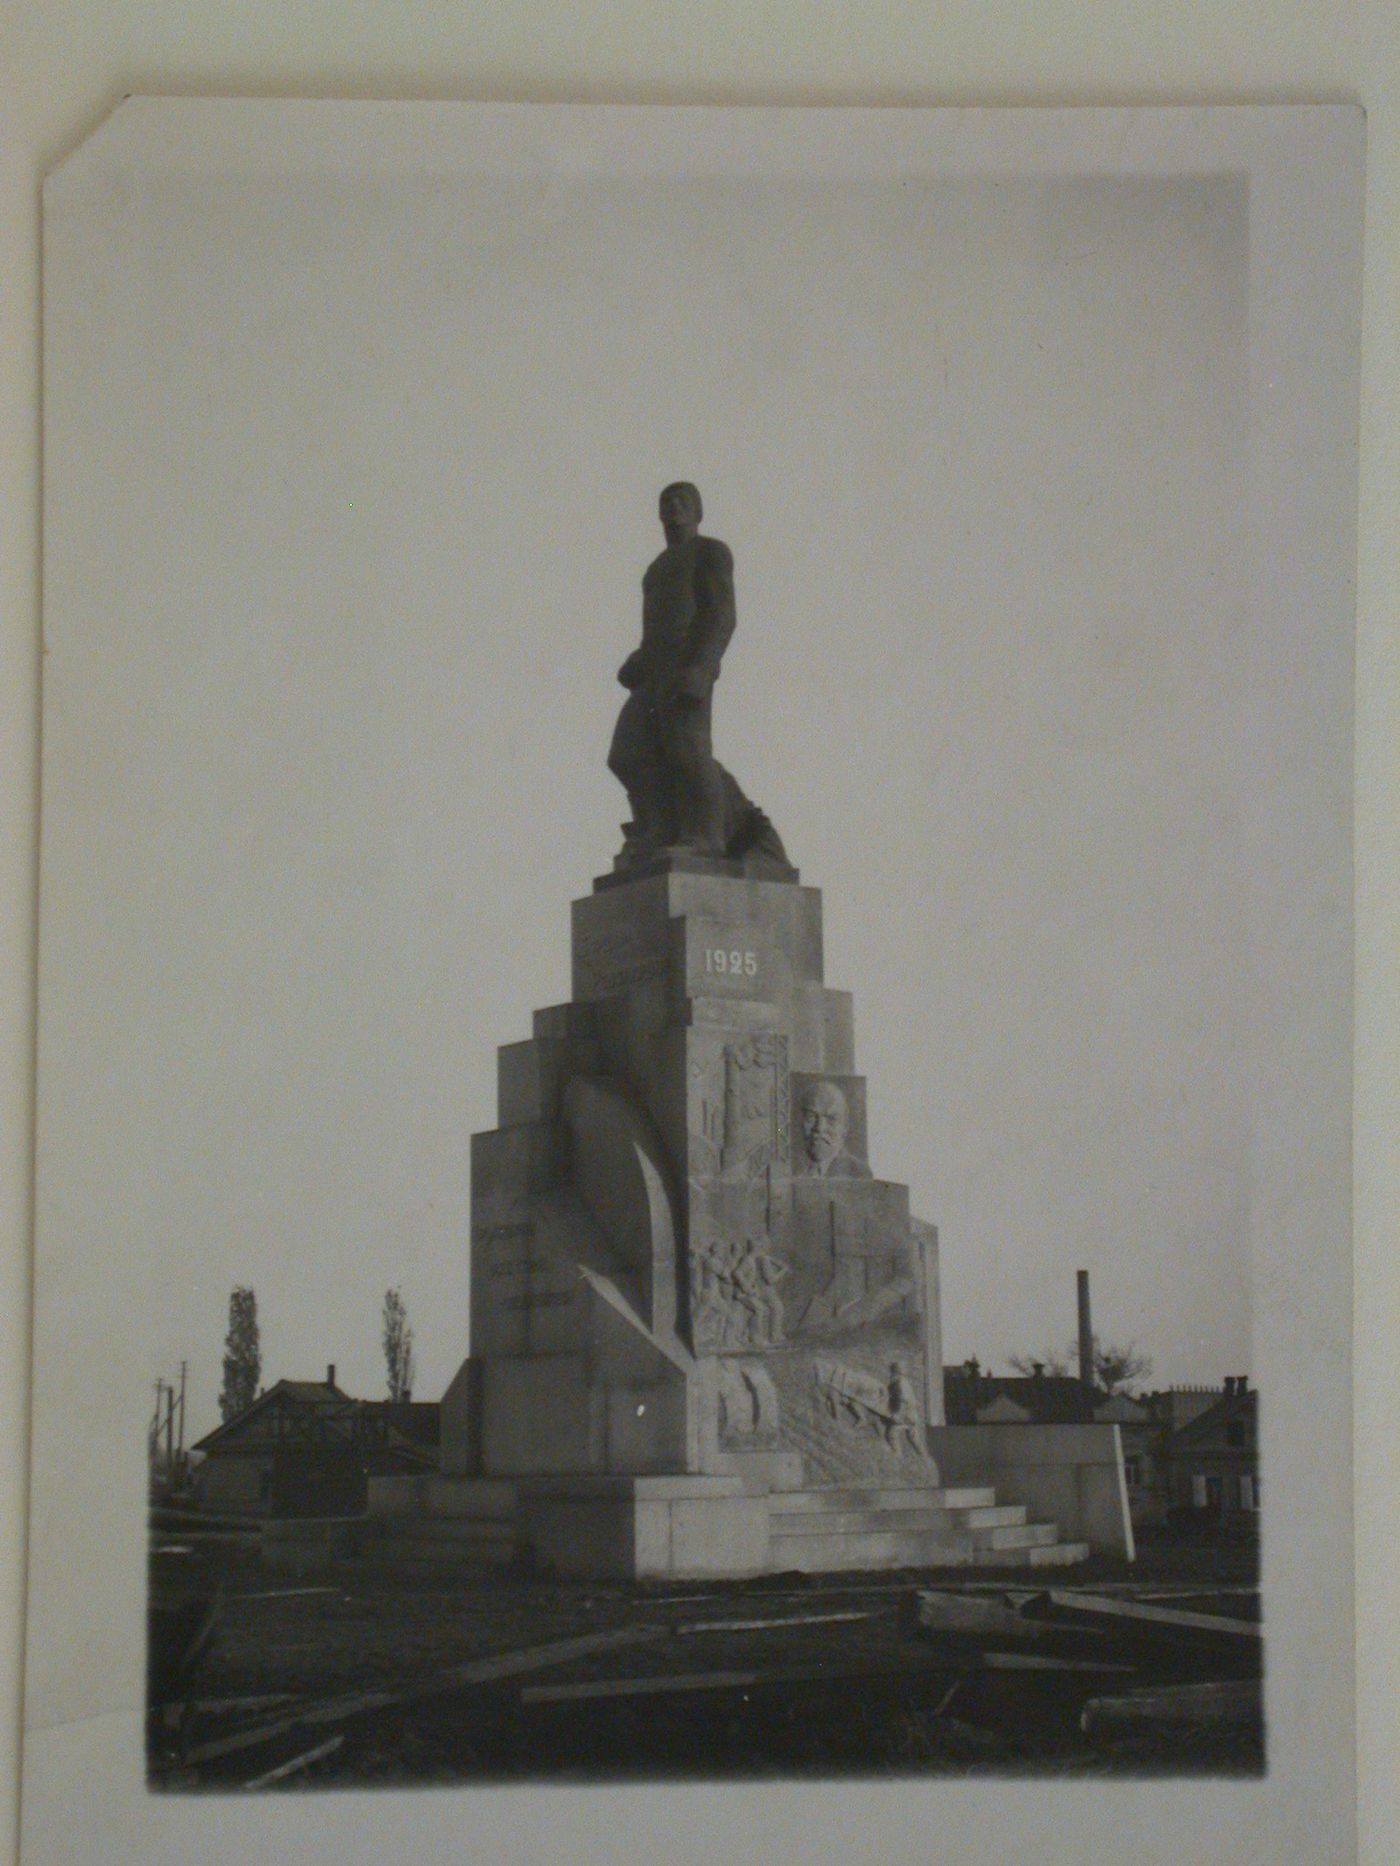 View of a monument to the Fighters of the Revolution, Saratov, Soviet Union (now in Russia)